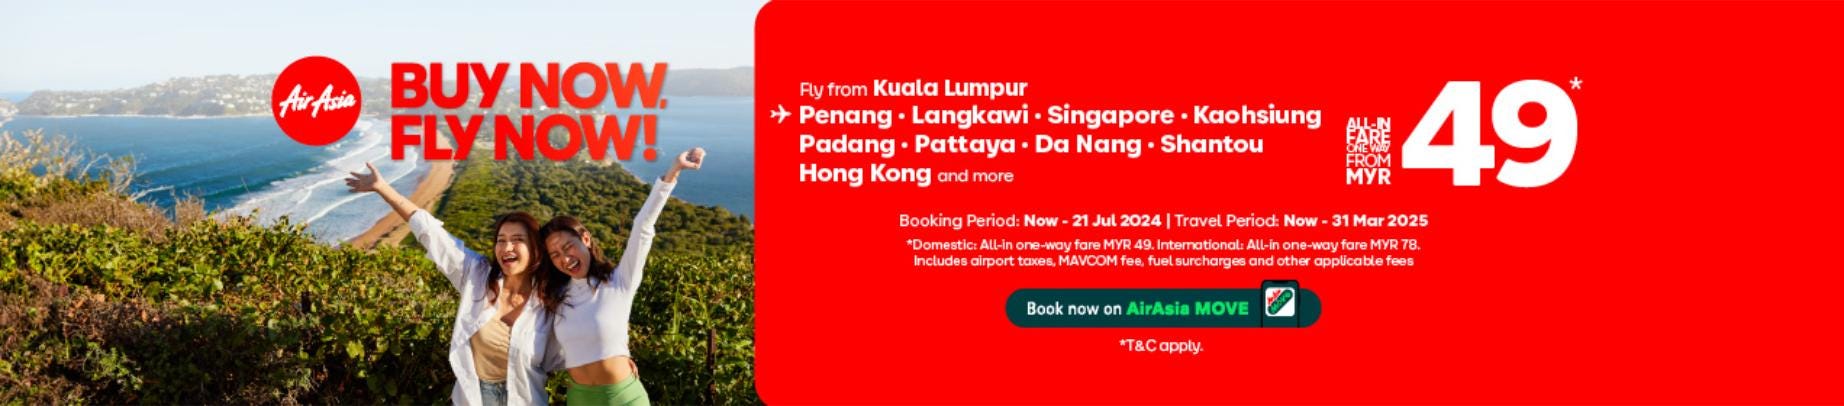 All-in one-way fare from MYR 49*